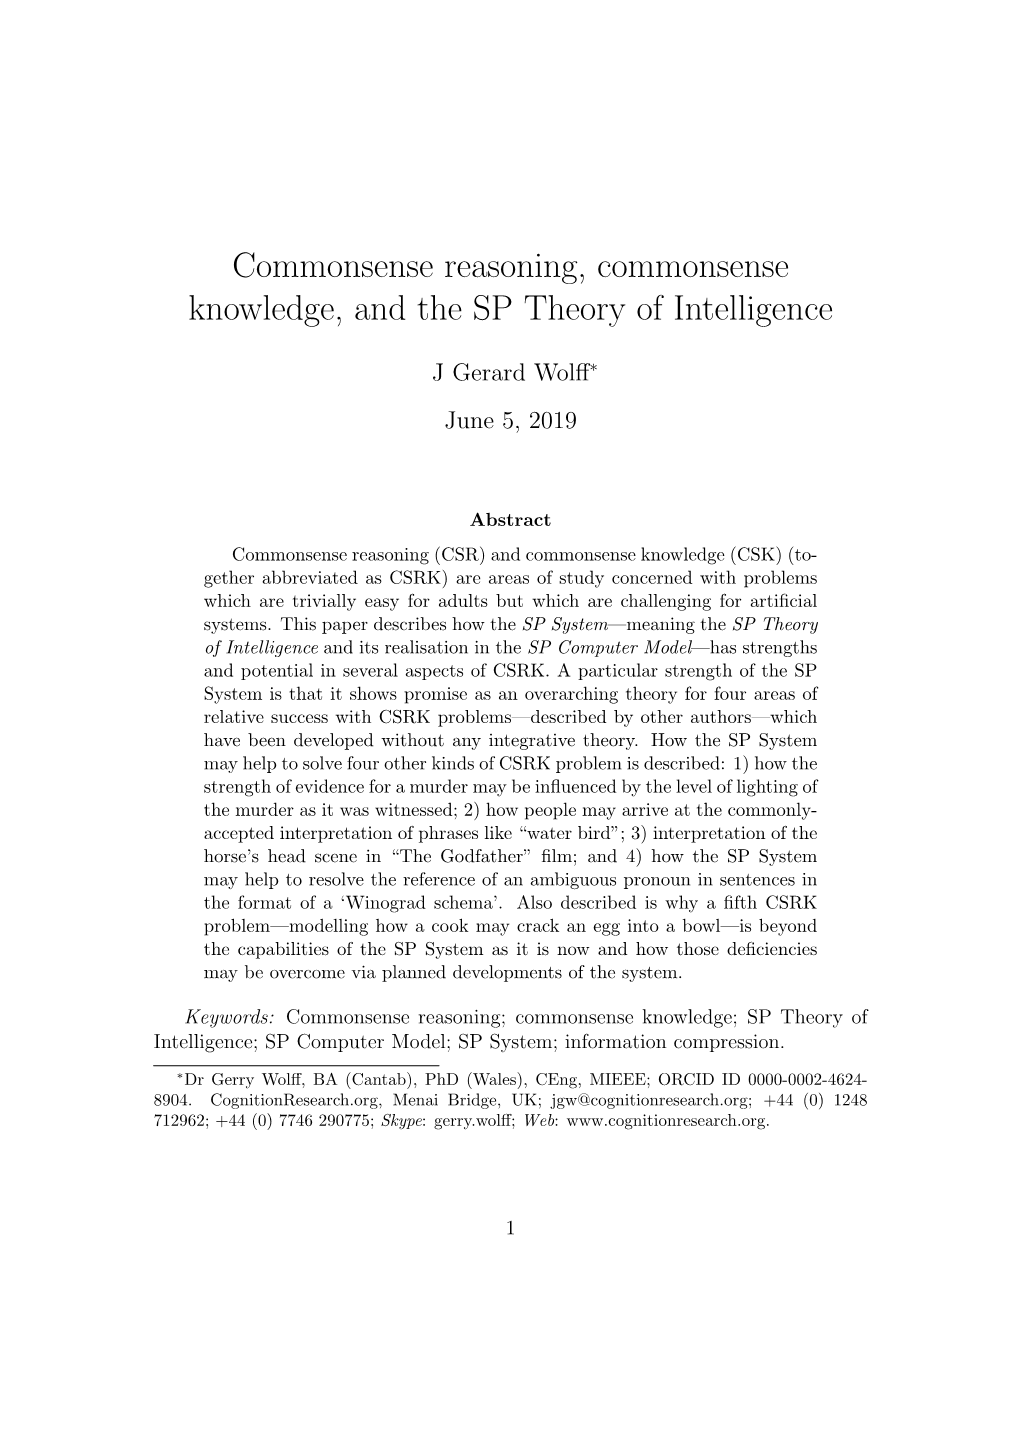 Commonsense Reasoning, Commonsense Knowledge, and the SP Theory of Intelligence